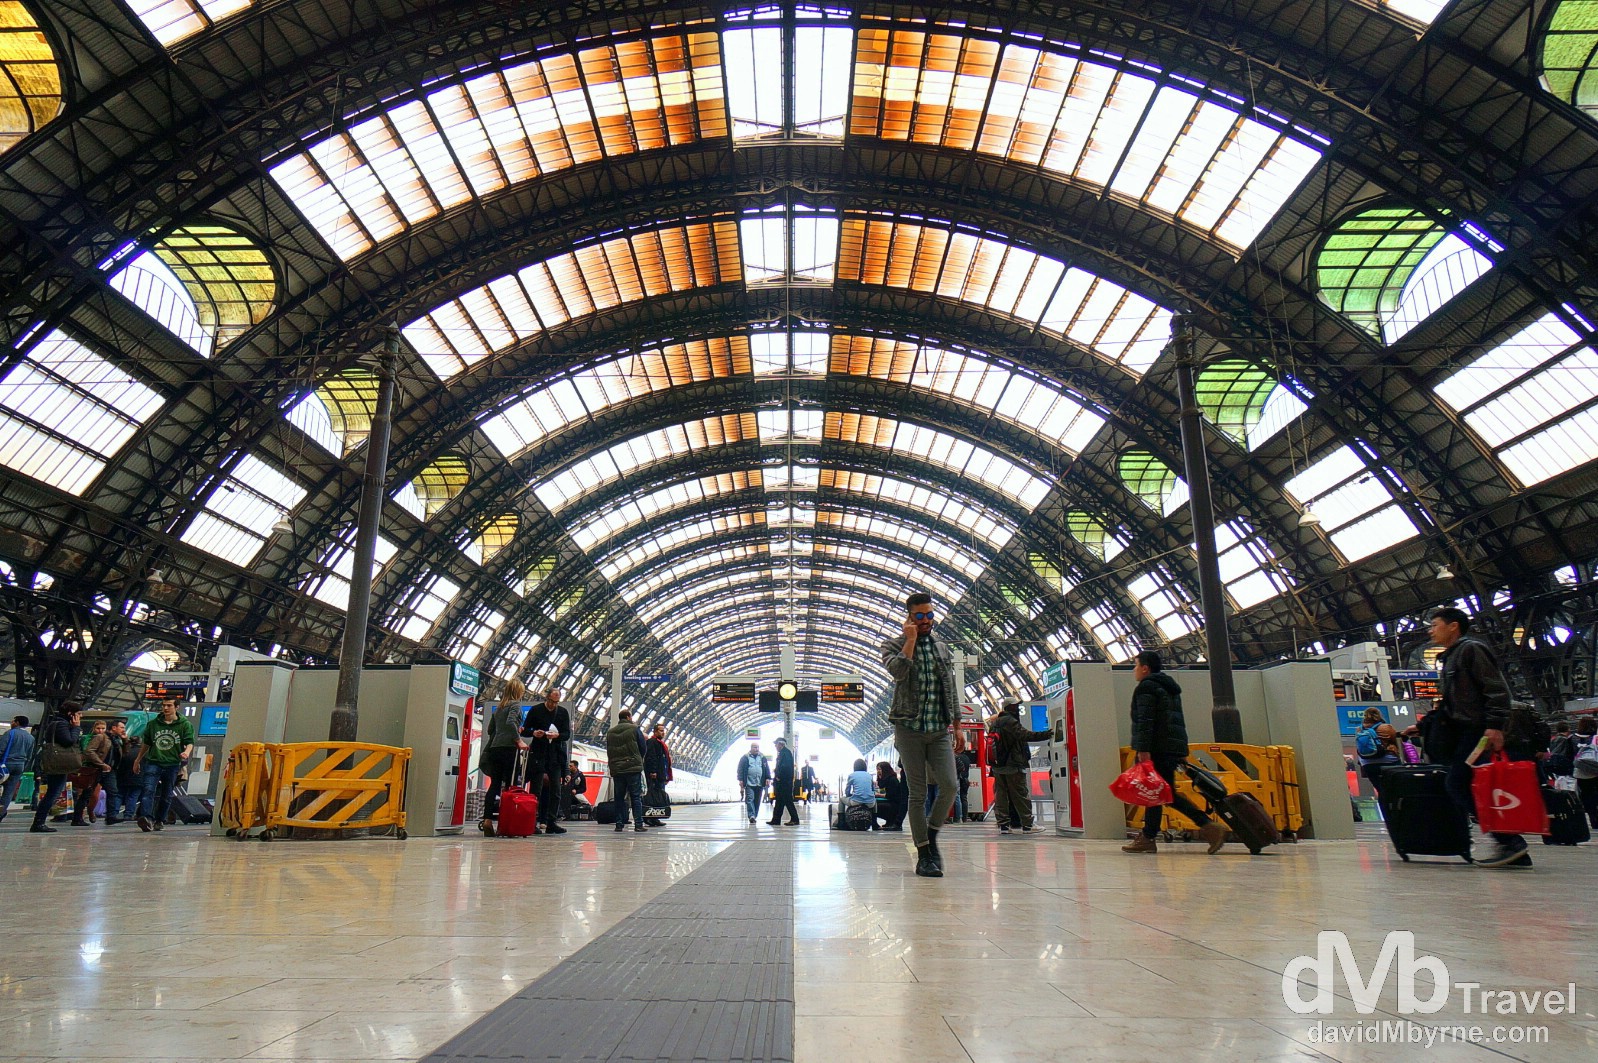 Milano Centrale - wide-angle territory. Milan, Lombardy, northern Italy. March 16th, 2013 (NEX-5r || SEL10-20mm || 10mm, 1/60sec, f/4.5, iso100)   